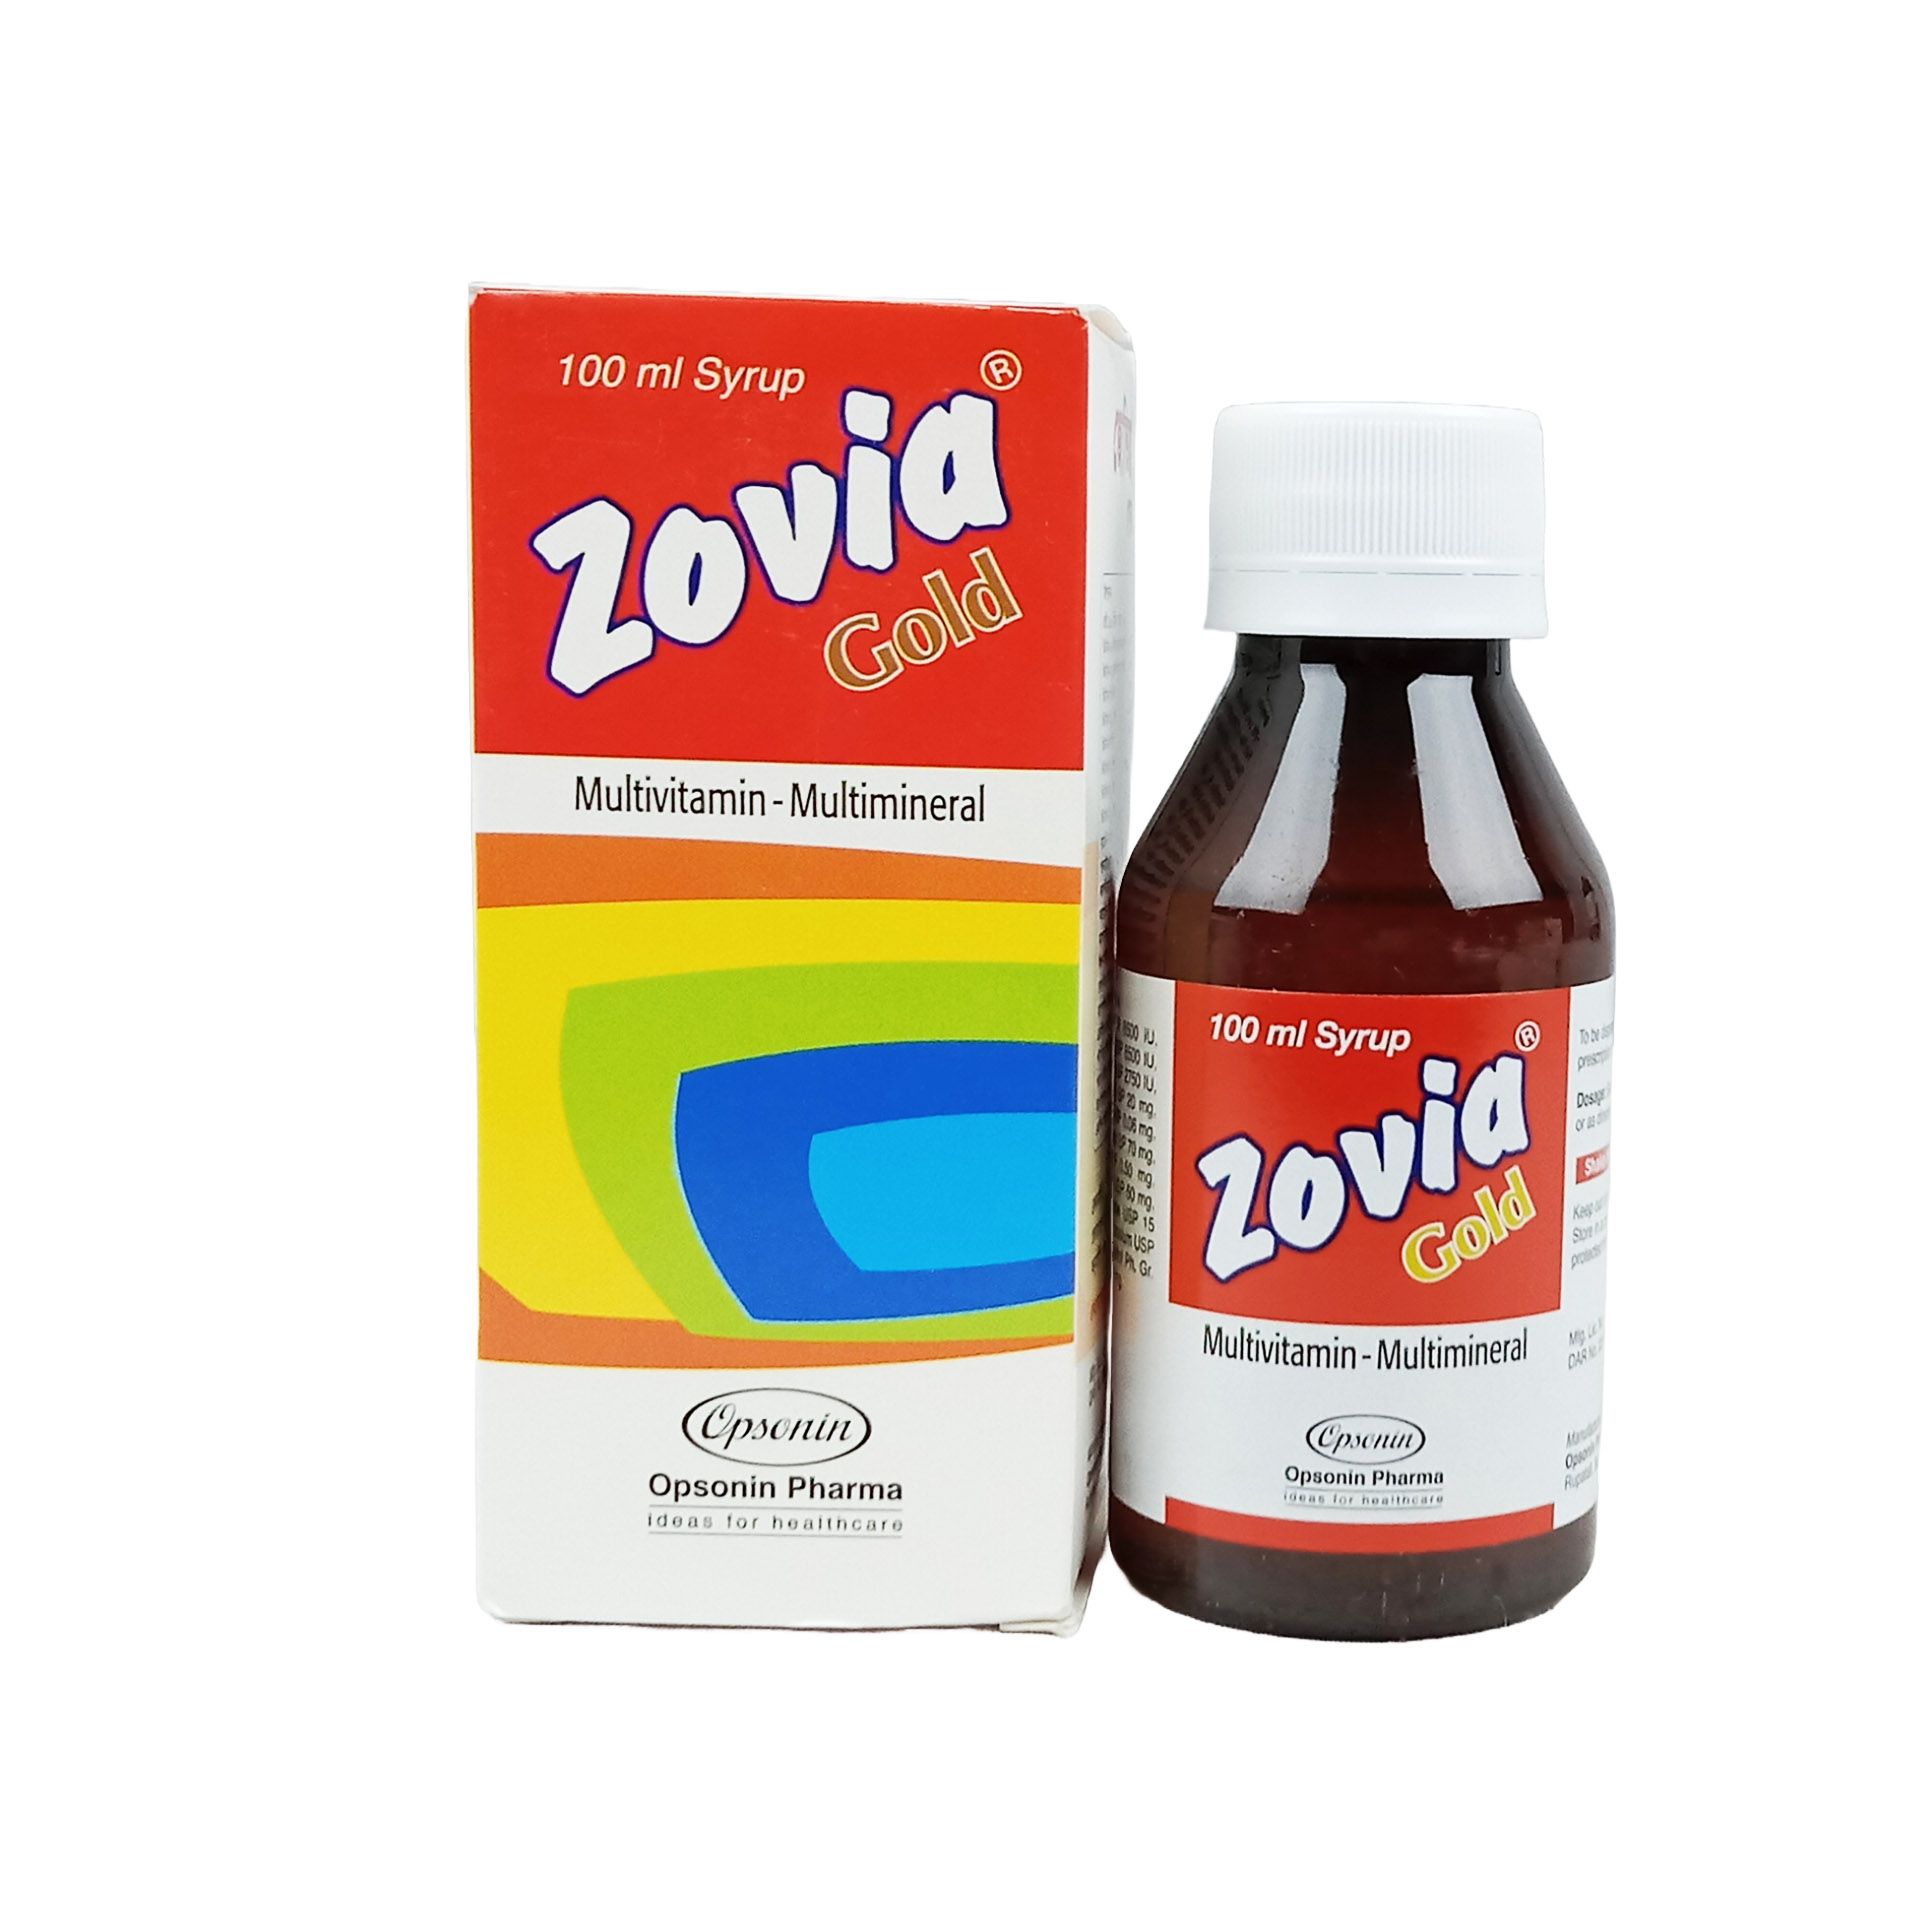 Zovia GOLD 100ml Syrup